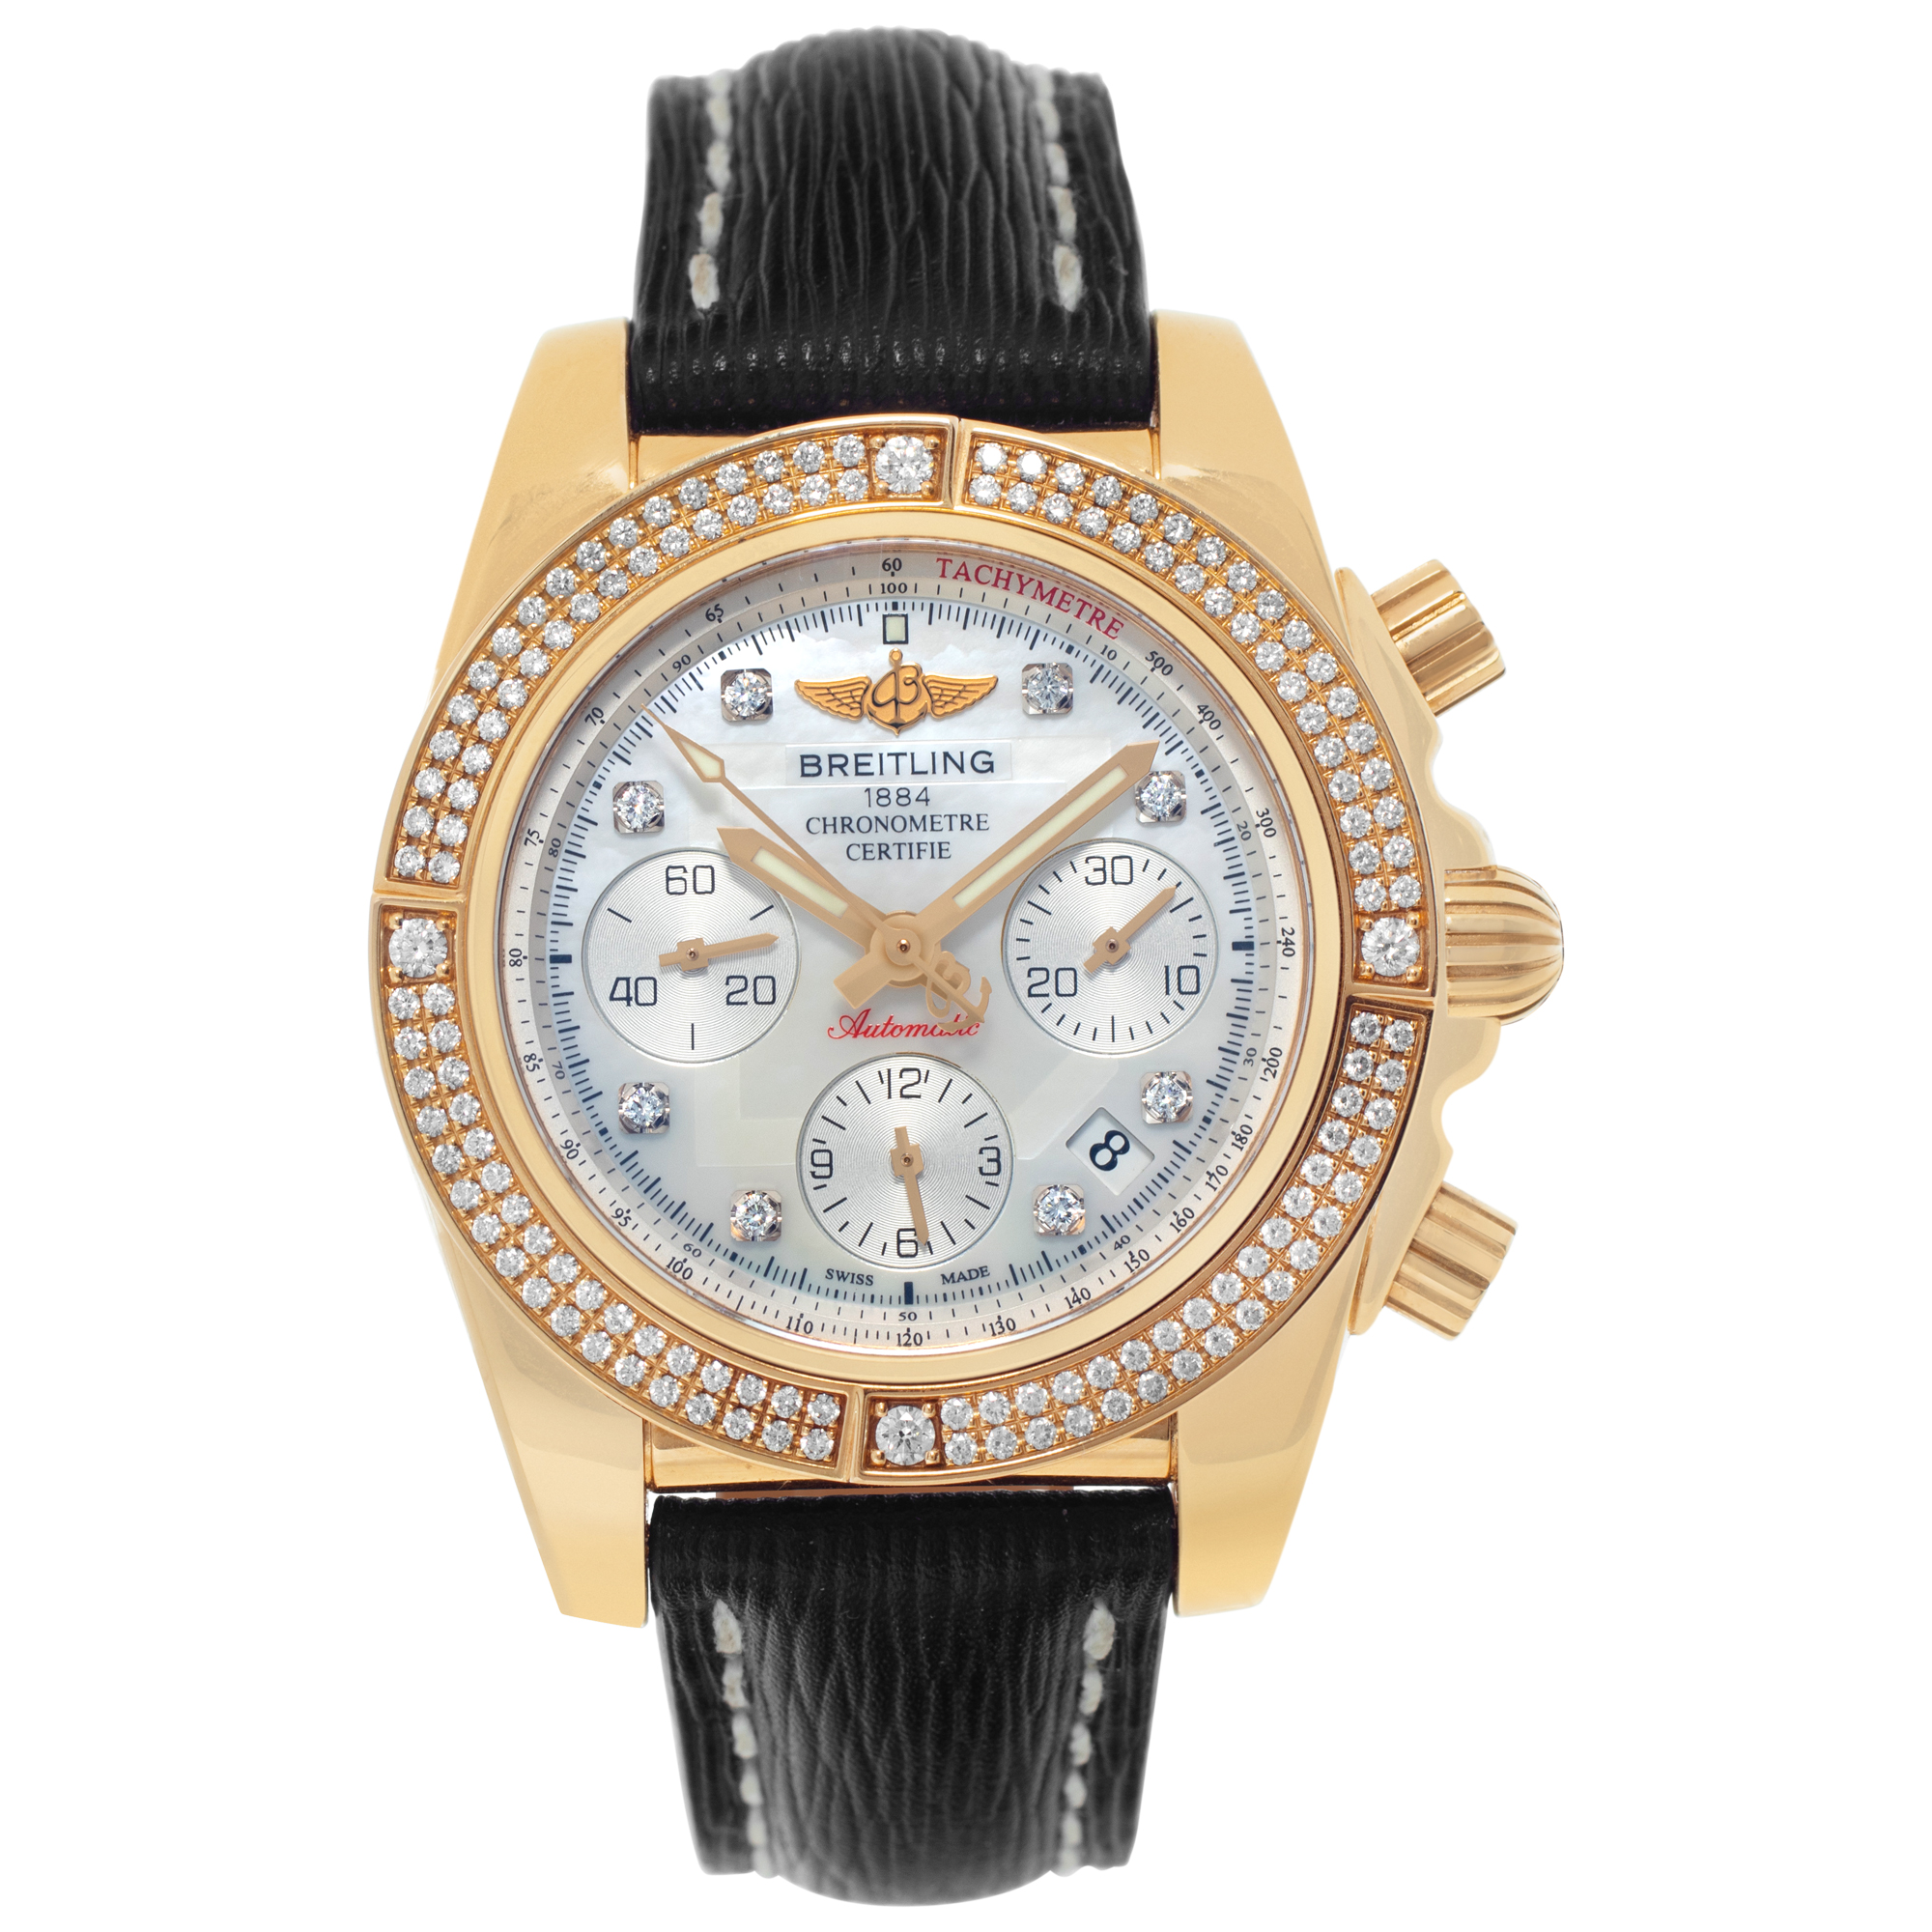 Breitling Chronomat 41mm HB0140 (Watches)